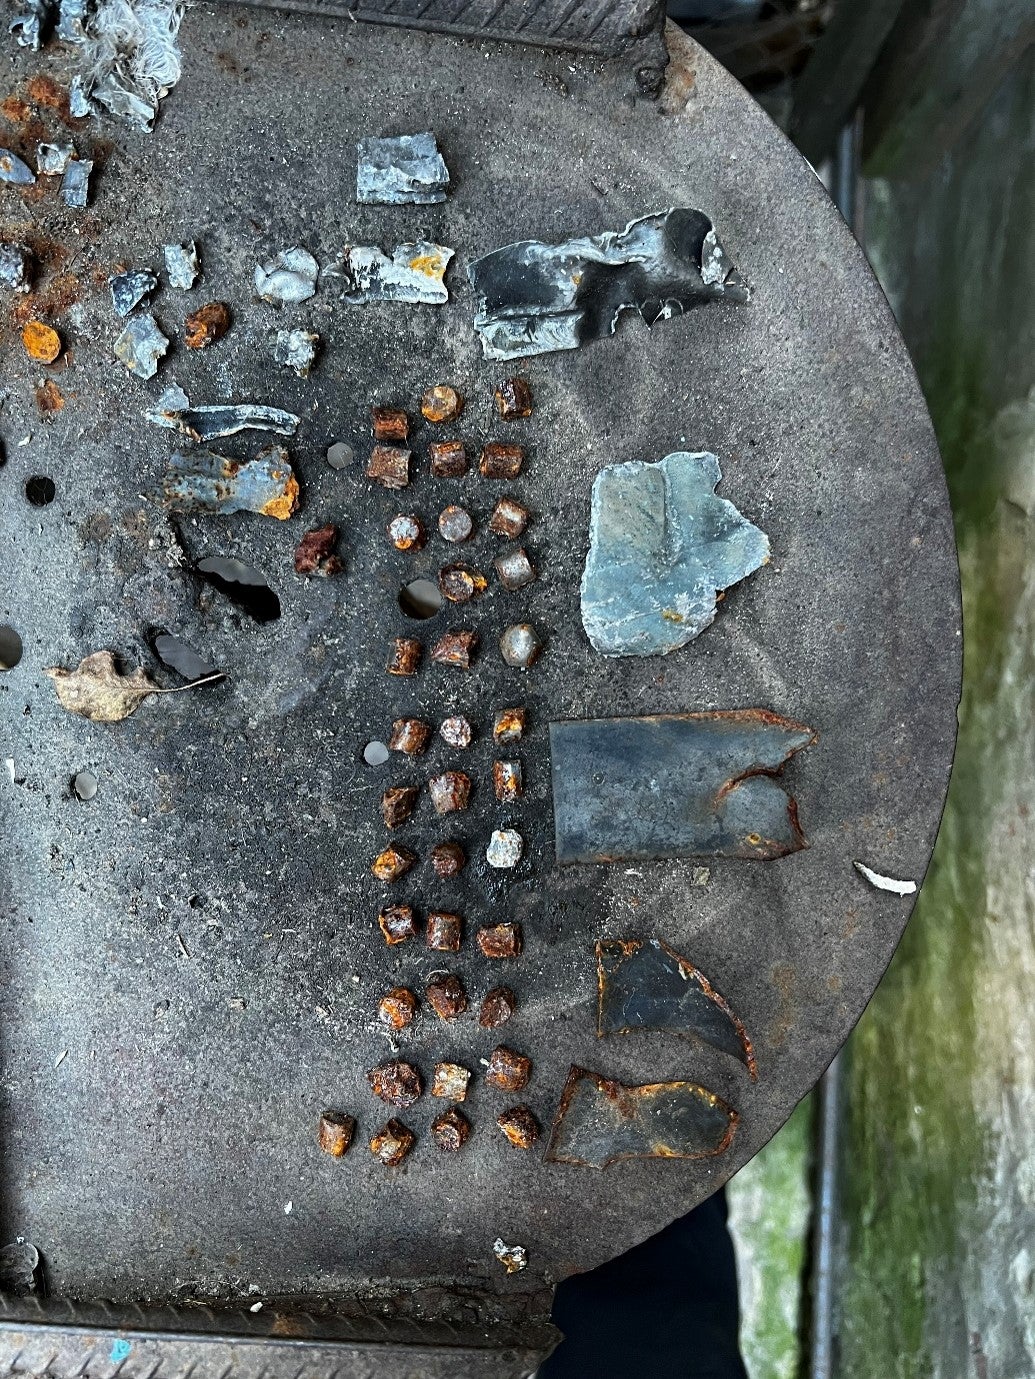 Remnants of 9N210 or 9N235 fragmentation submunitions that a family living on the right bank of the Siverskiy Donets River collected from their garden while Russian forces occupied the area in 2022.  